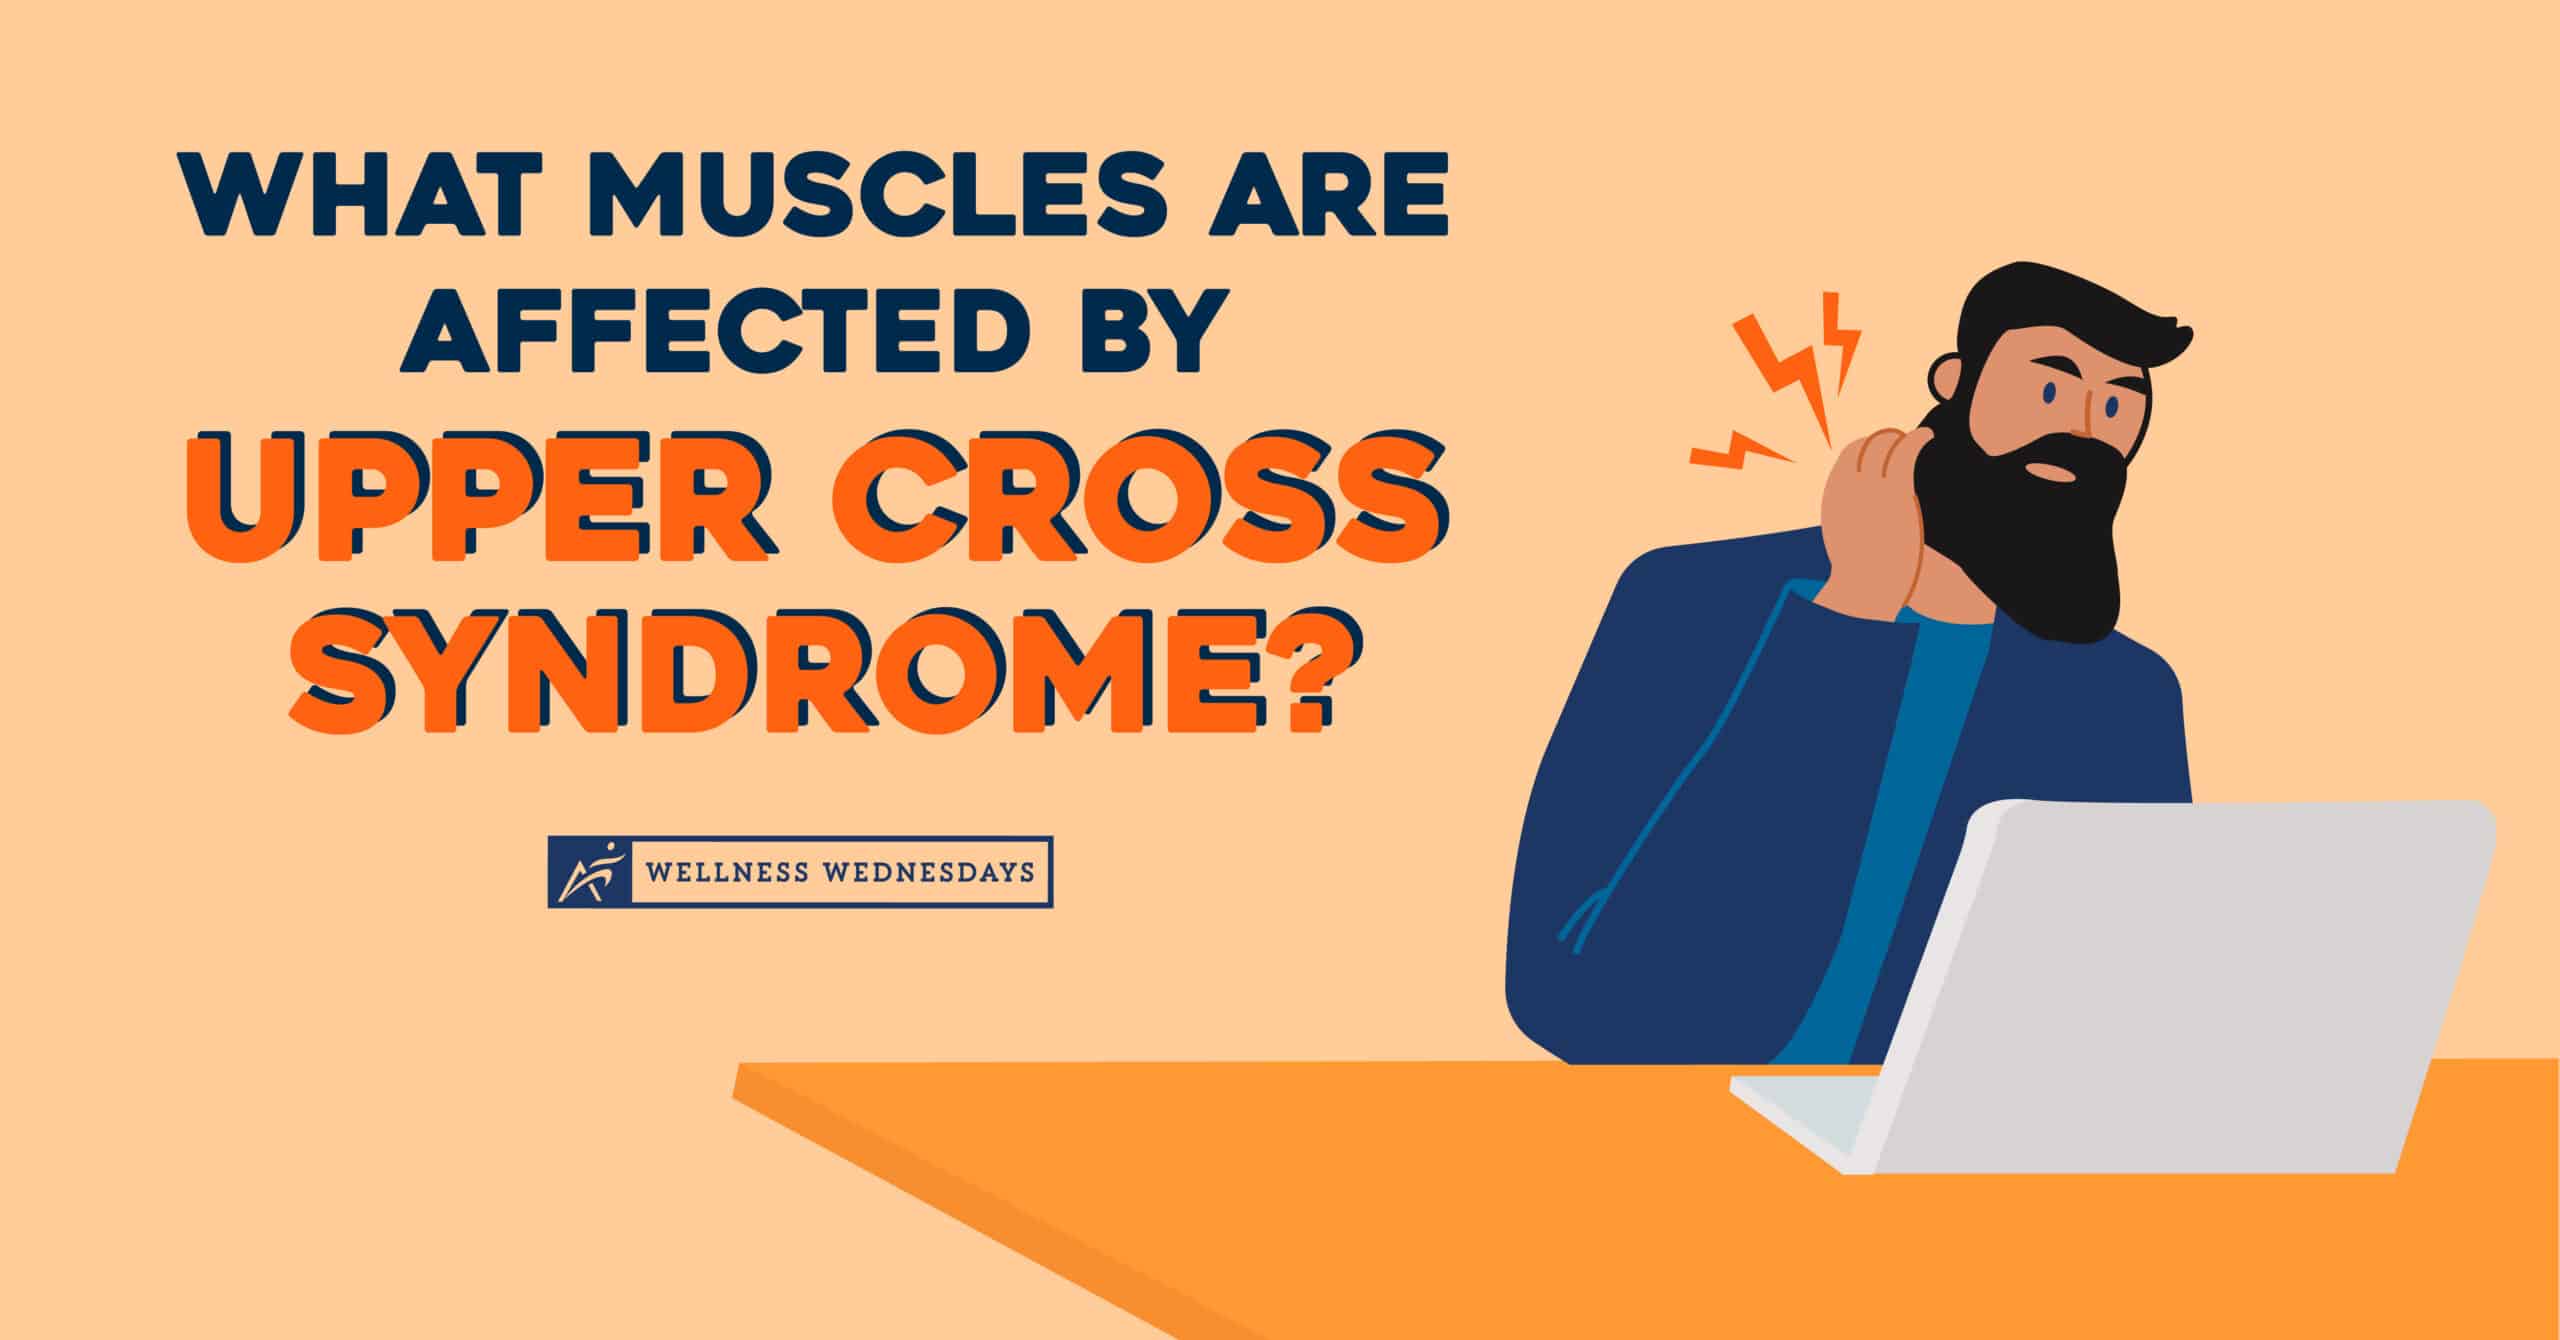 What Muscles Are Affected by Upper Cross Syndrome